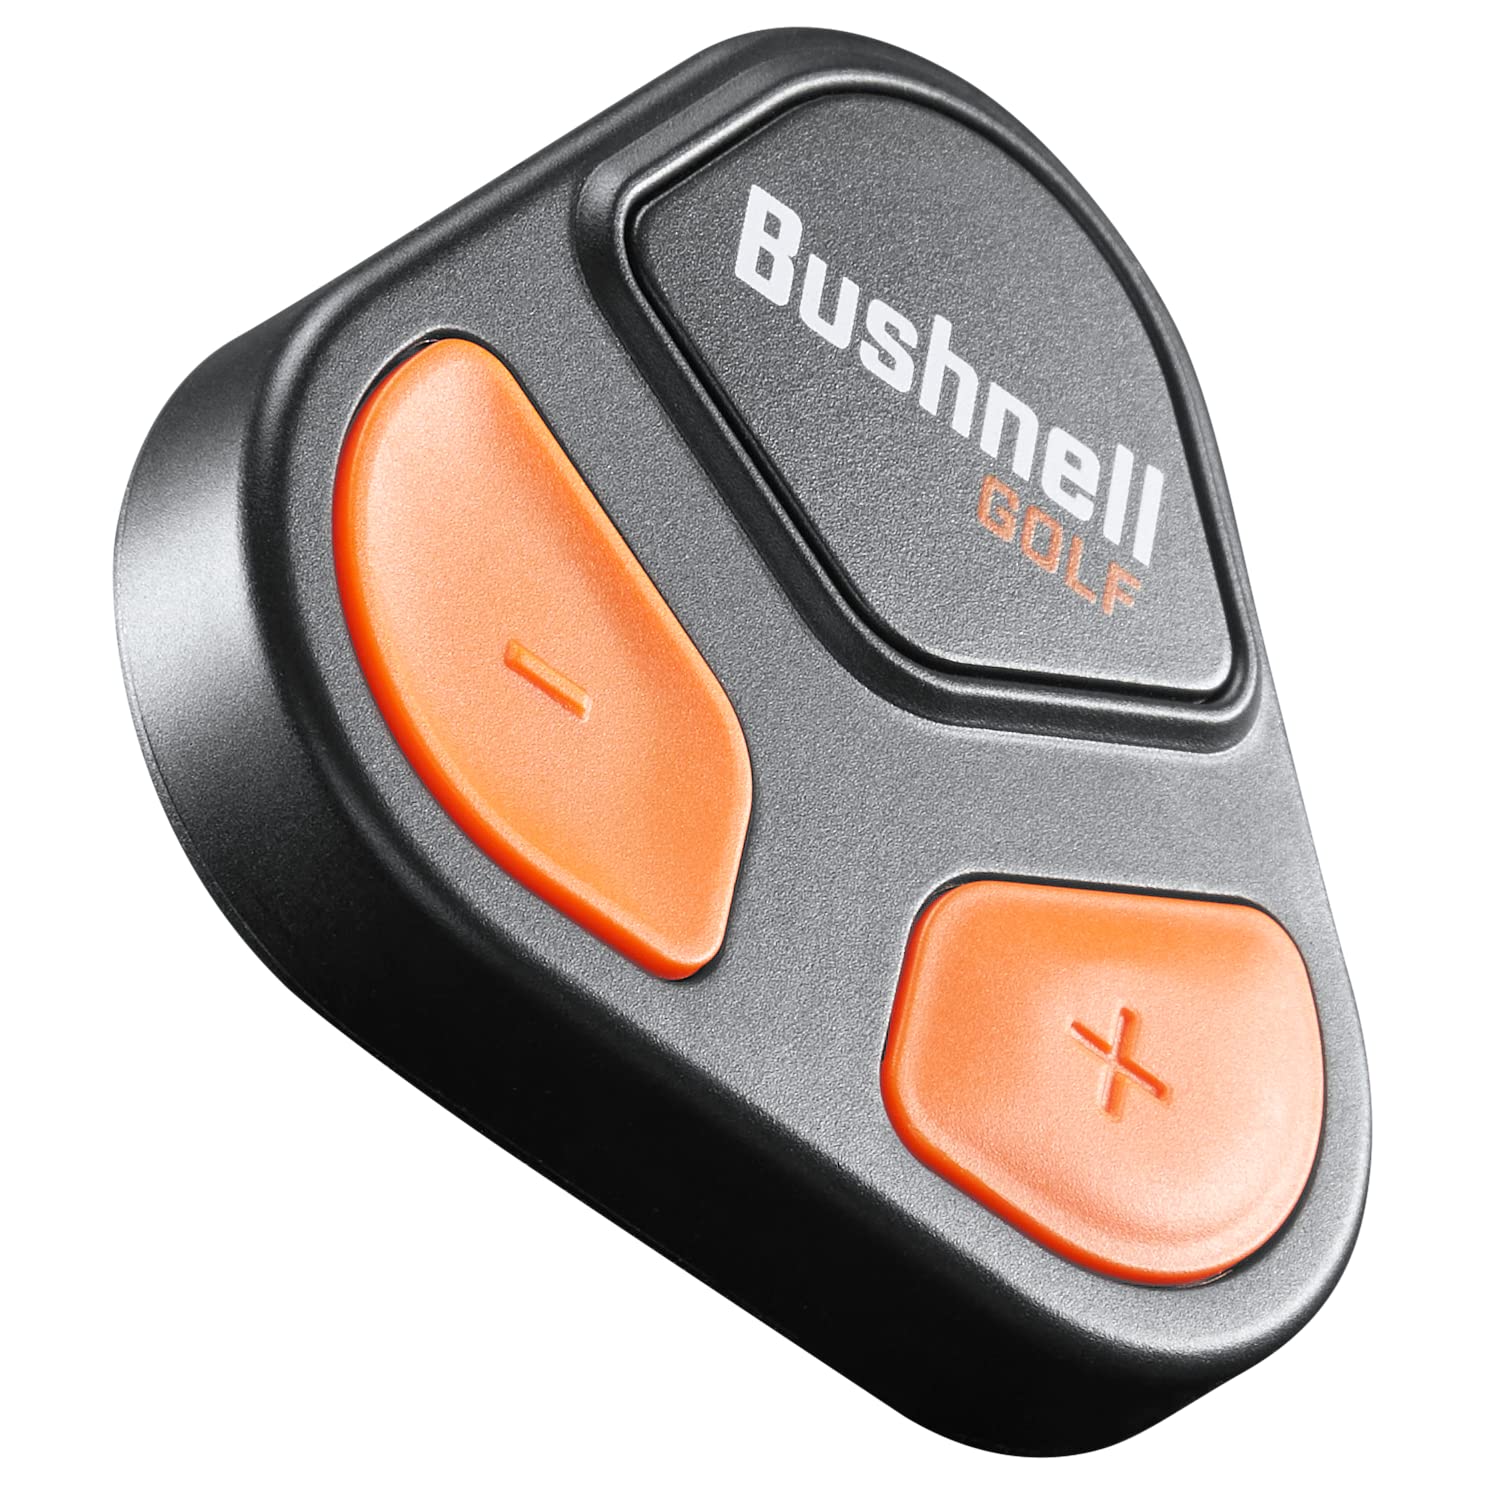 Bushnell Golf Wingman View Golf GPS Speaker - Visible GPS, View Hazards & Green Distances, Magnetic BITE Mount, 10 Hour Battery Life